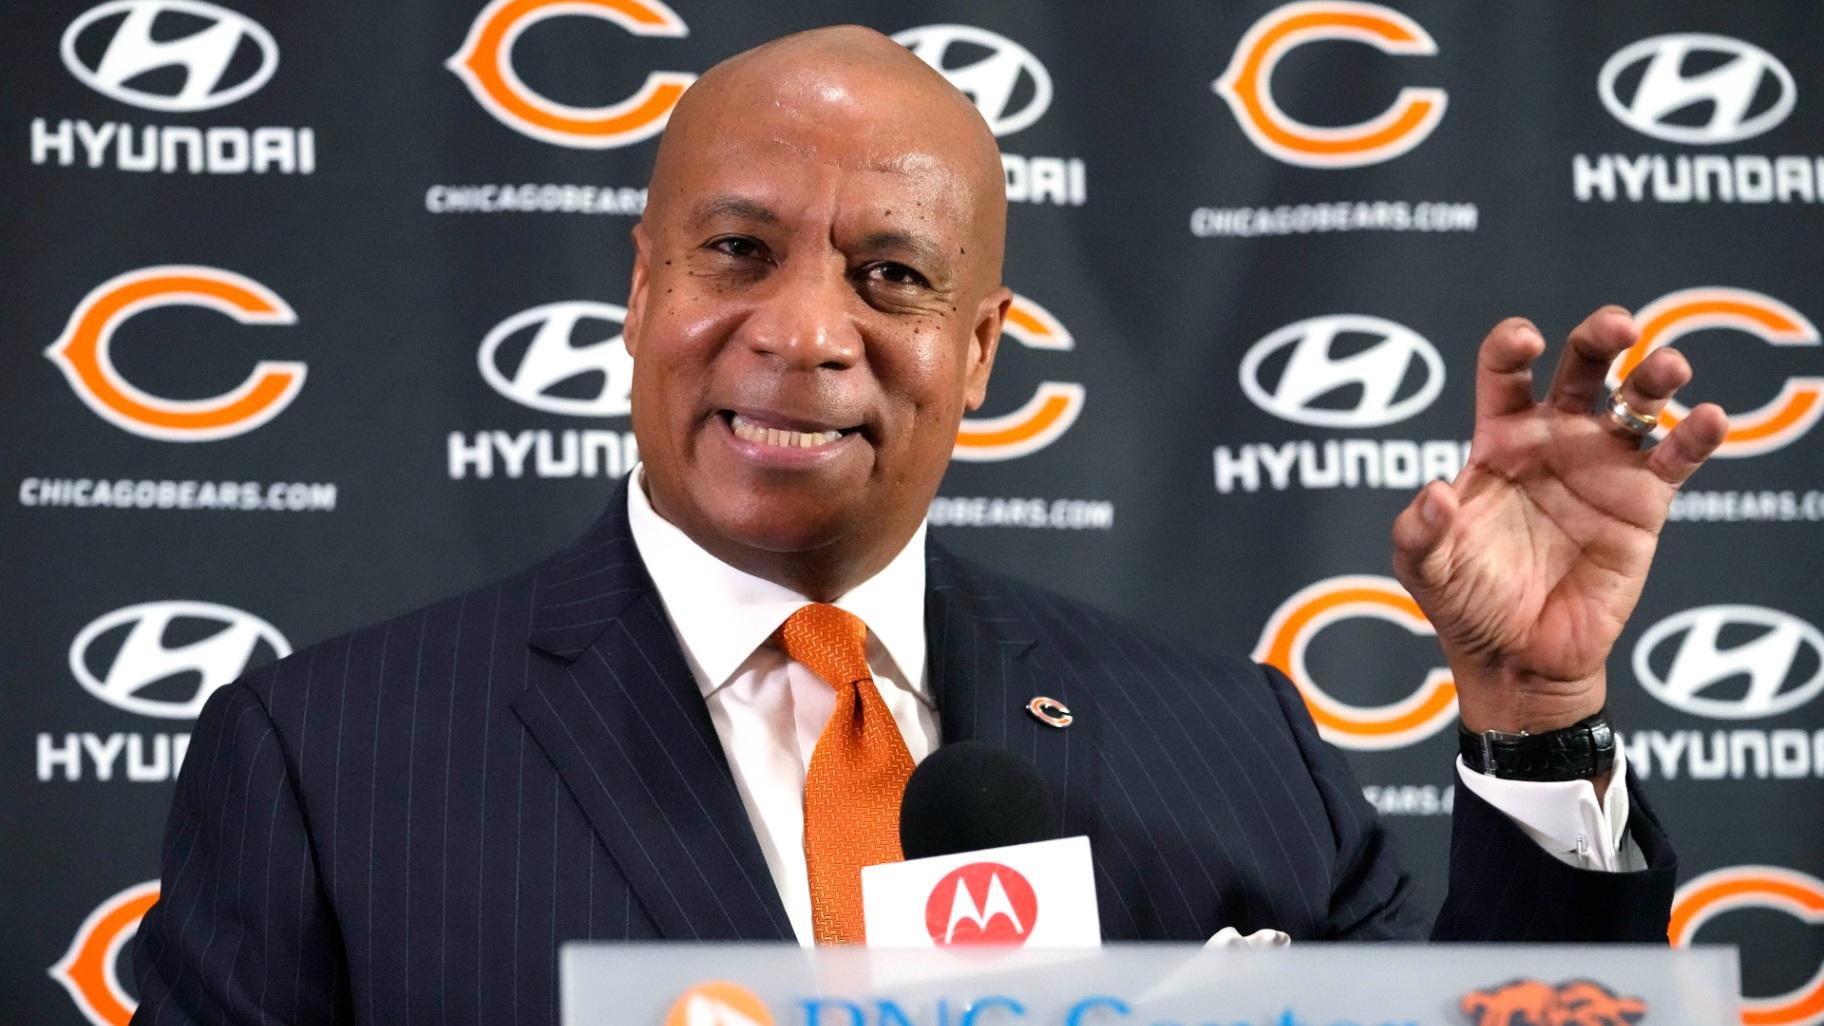 Chicago Bears new President & CEO Kevin Warren speaks during an NFL football news conference at Halas Hall in Lake Forest, Ill., Tuesday, Jan. 17, 2023. KP Photo / Nam Y. Huh)